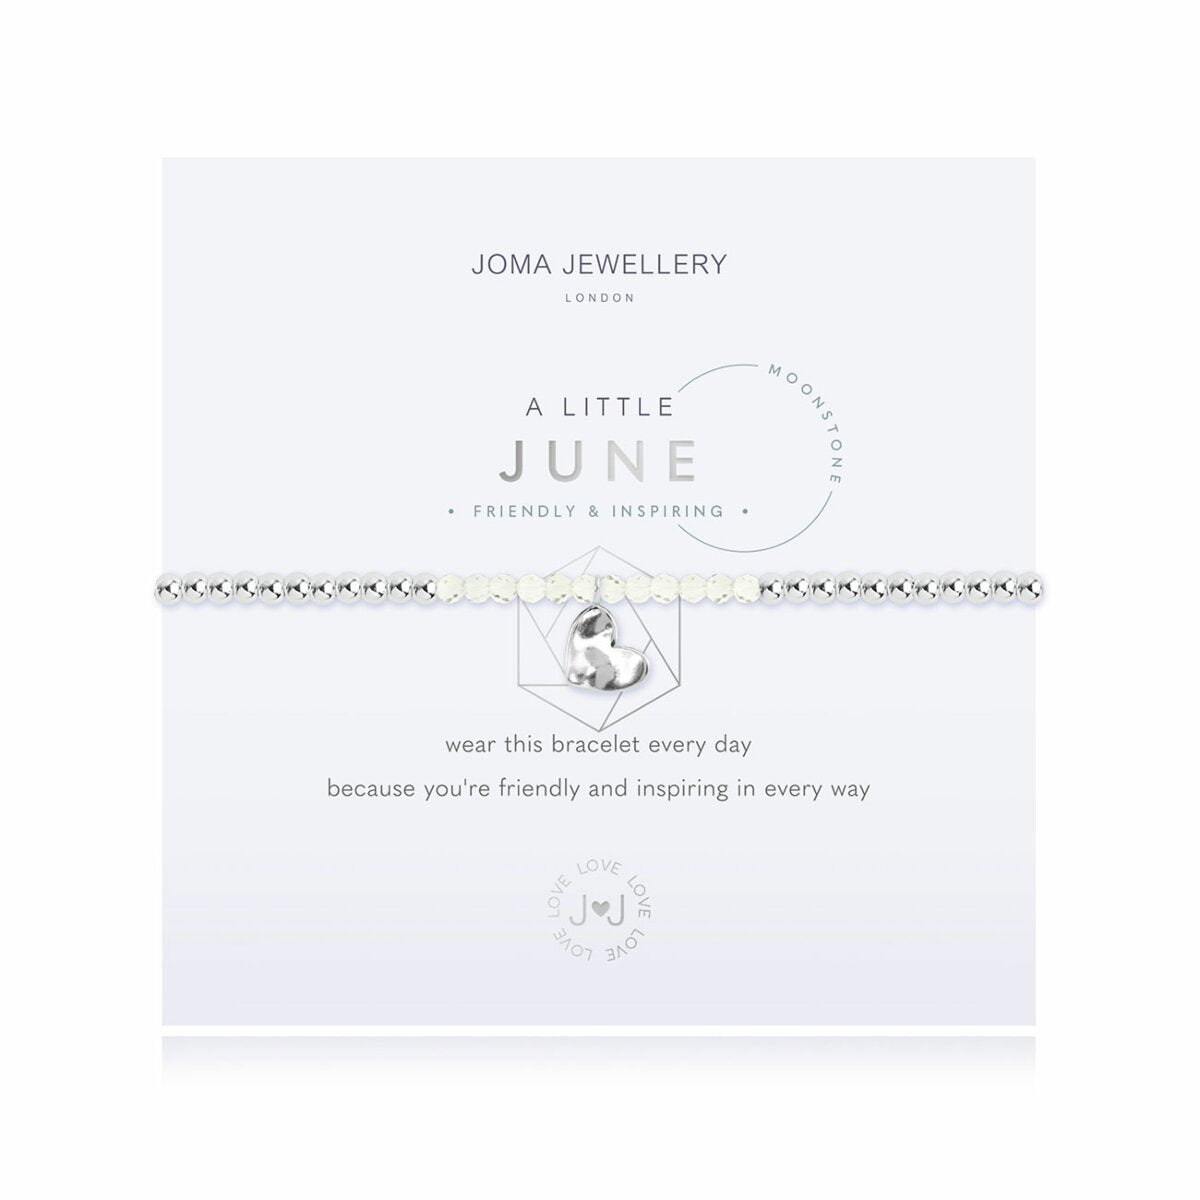 Wear this bracelet every day, because you're friendly and inspiring in every way.   For all June babies, our lovely 'A Little' bracelet radiates birthstone beauty with special moonstones and a gently hammered silver heart charm.